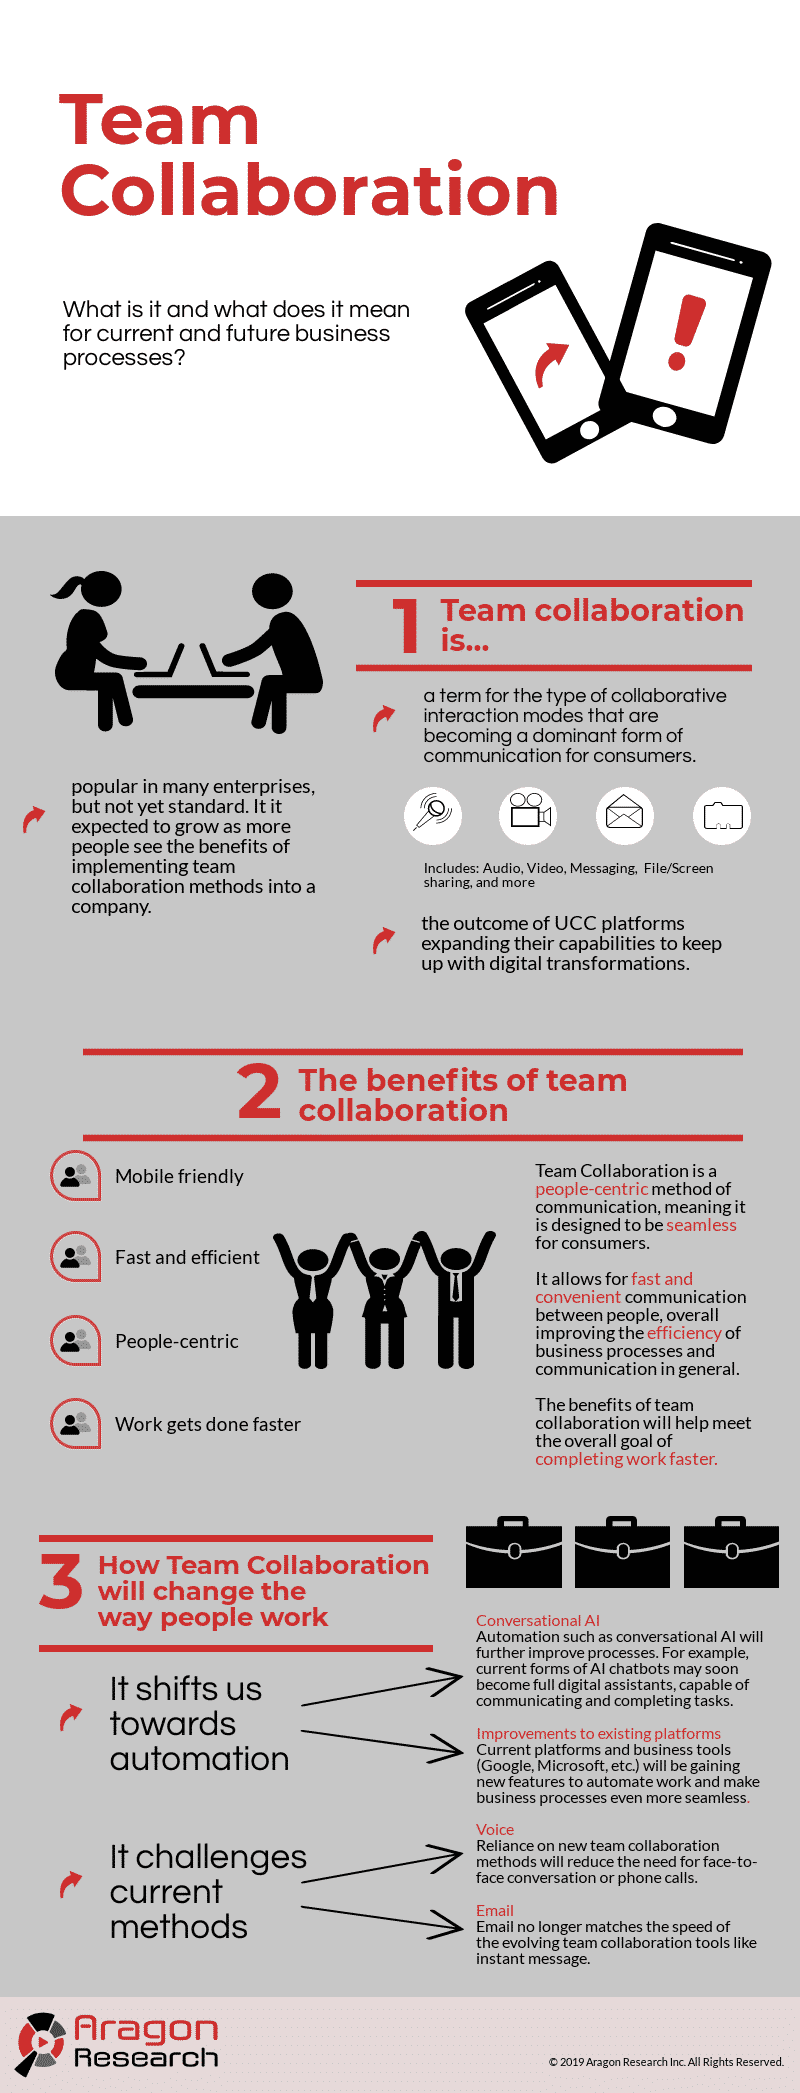 team collab 1 - [Infographic] Team Collaboration in 2019